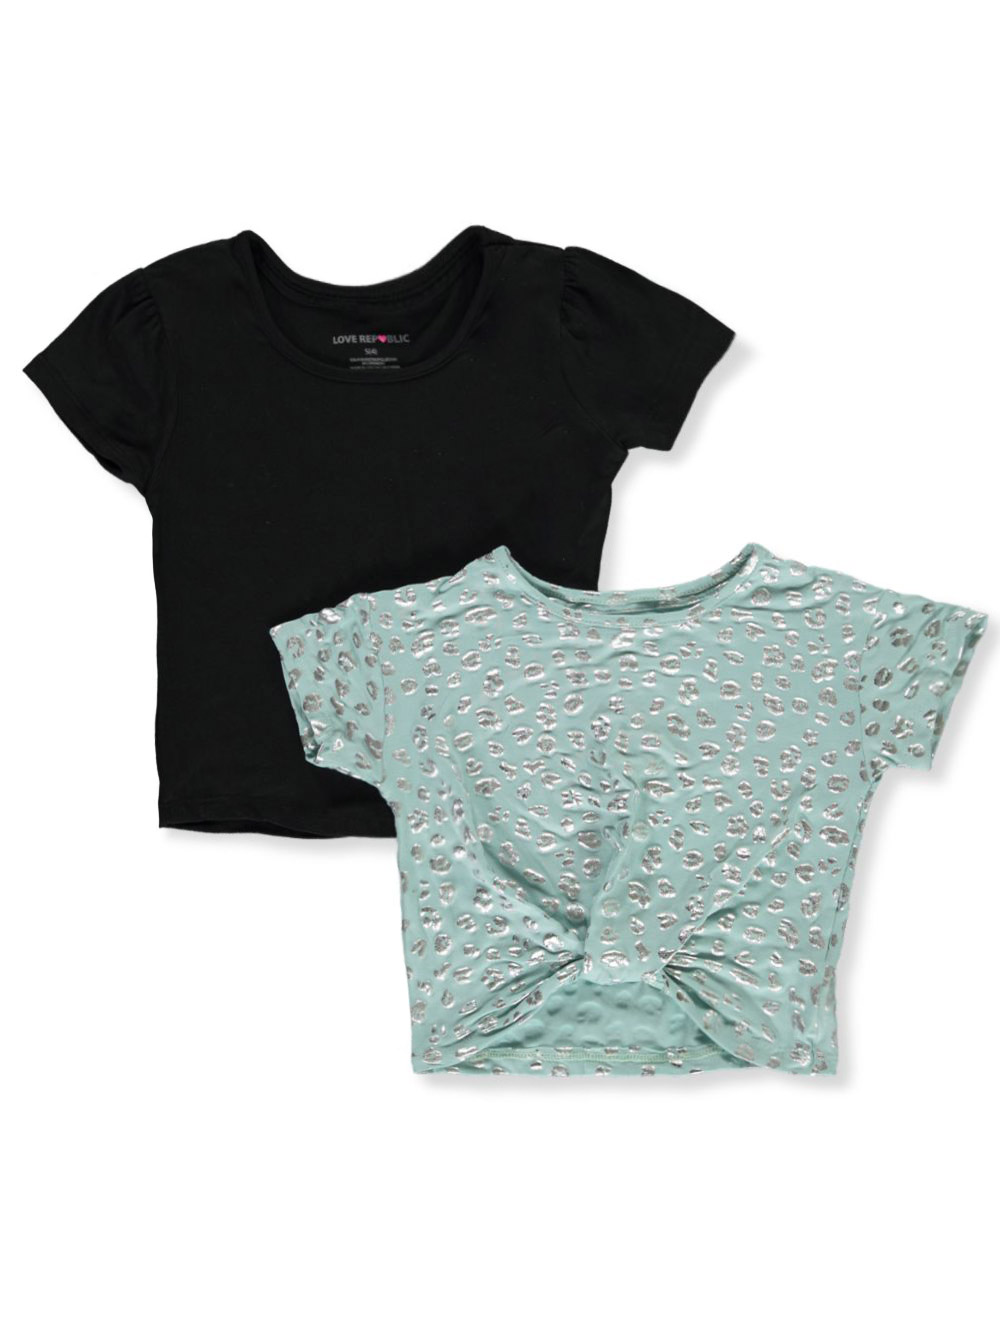 Size 3t Fashion Tops for Girls